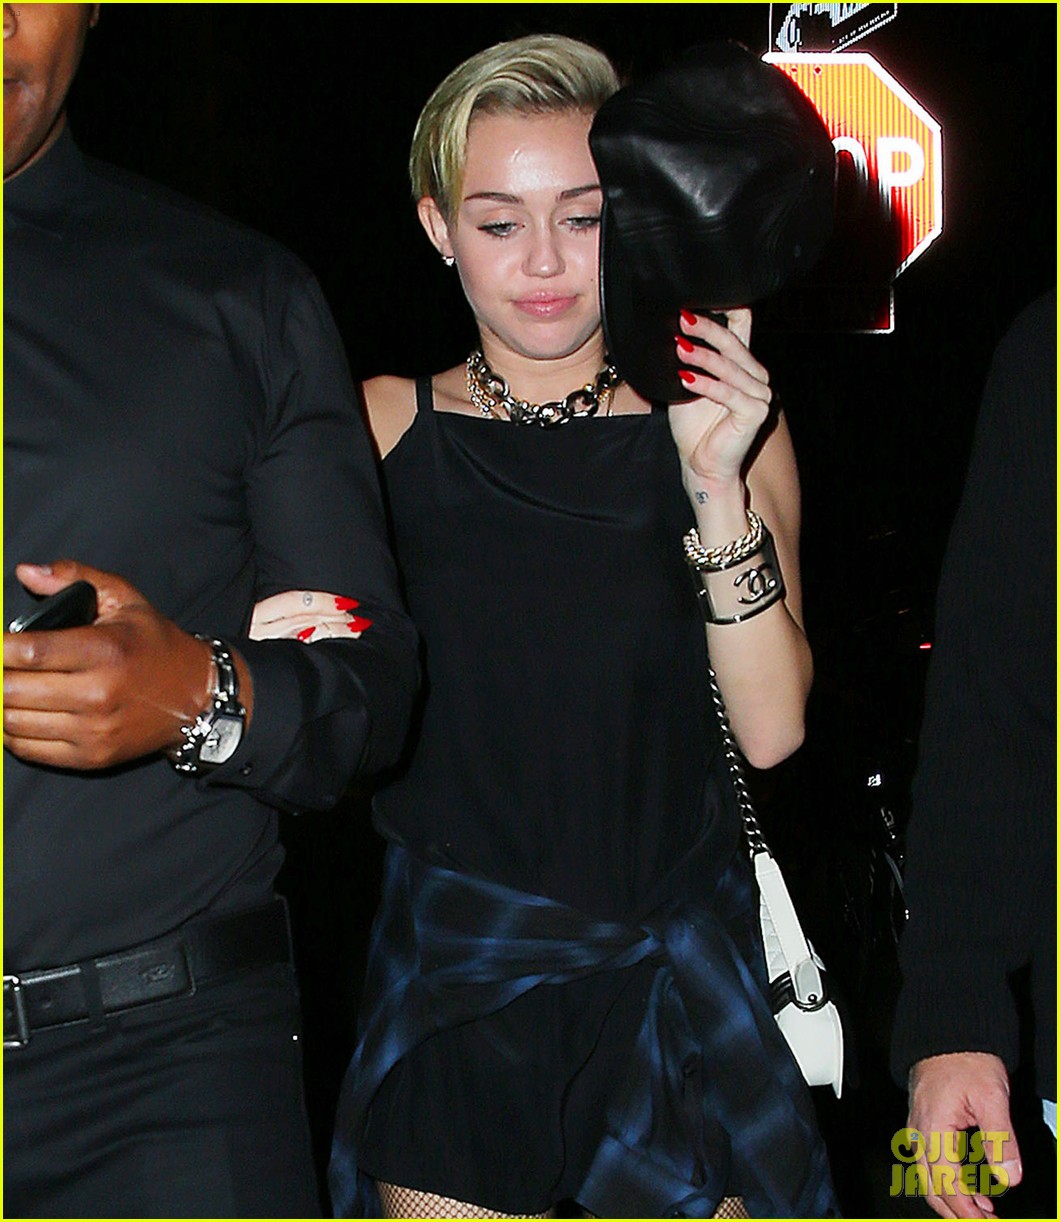 miley cyrus beatrice inn after night of stars gala 2013 04